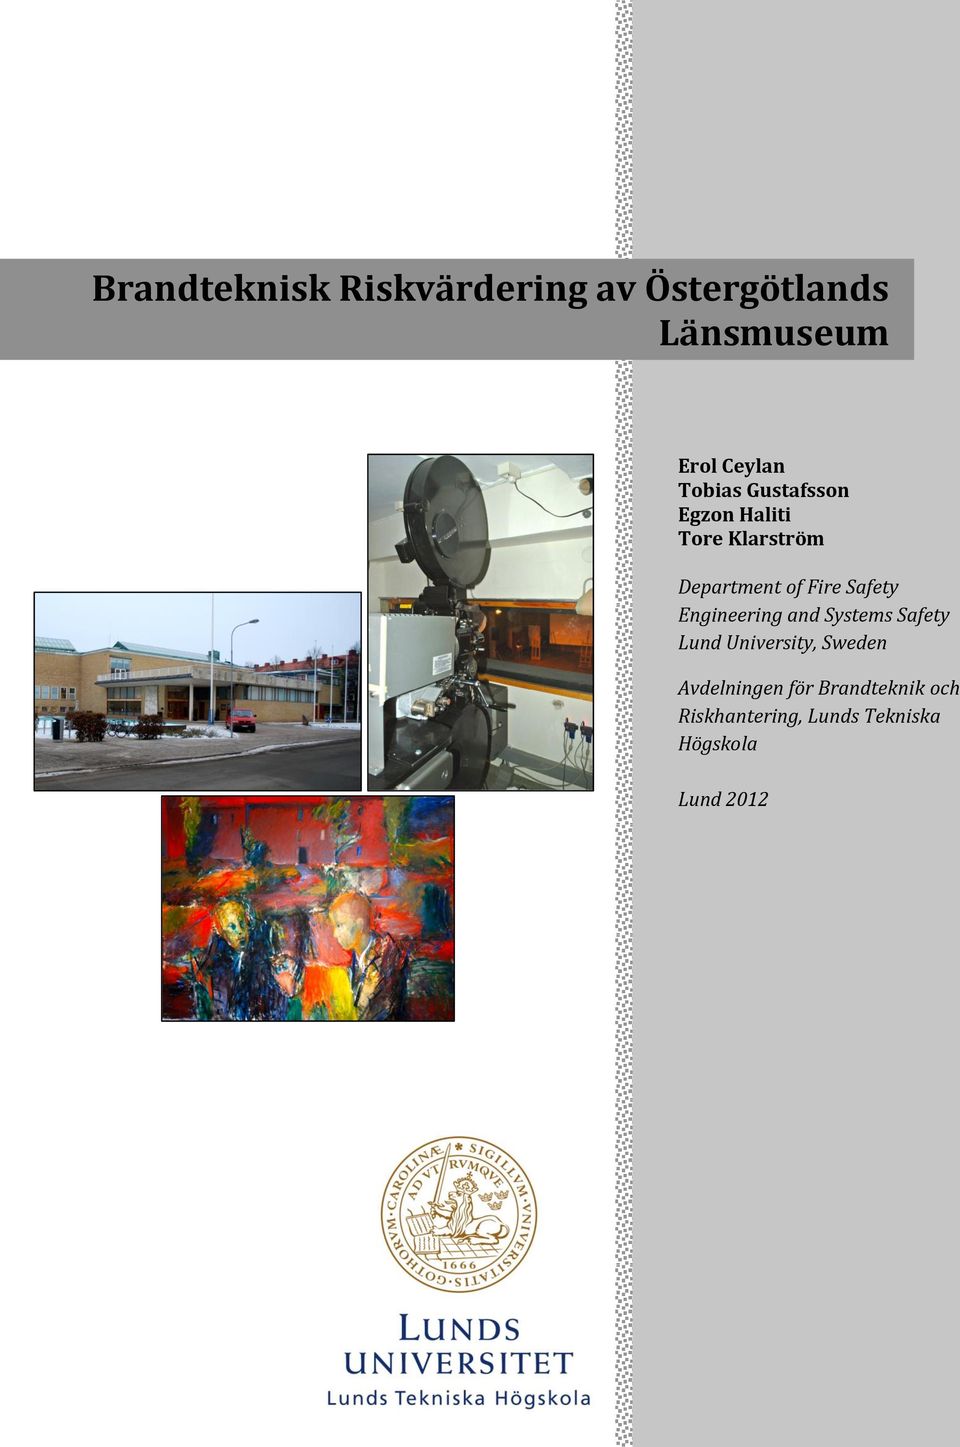 Safety Engineering and Systems Safety Lund University, Sweden